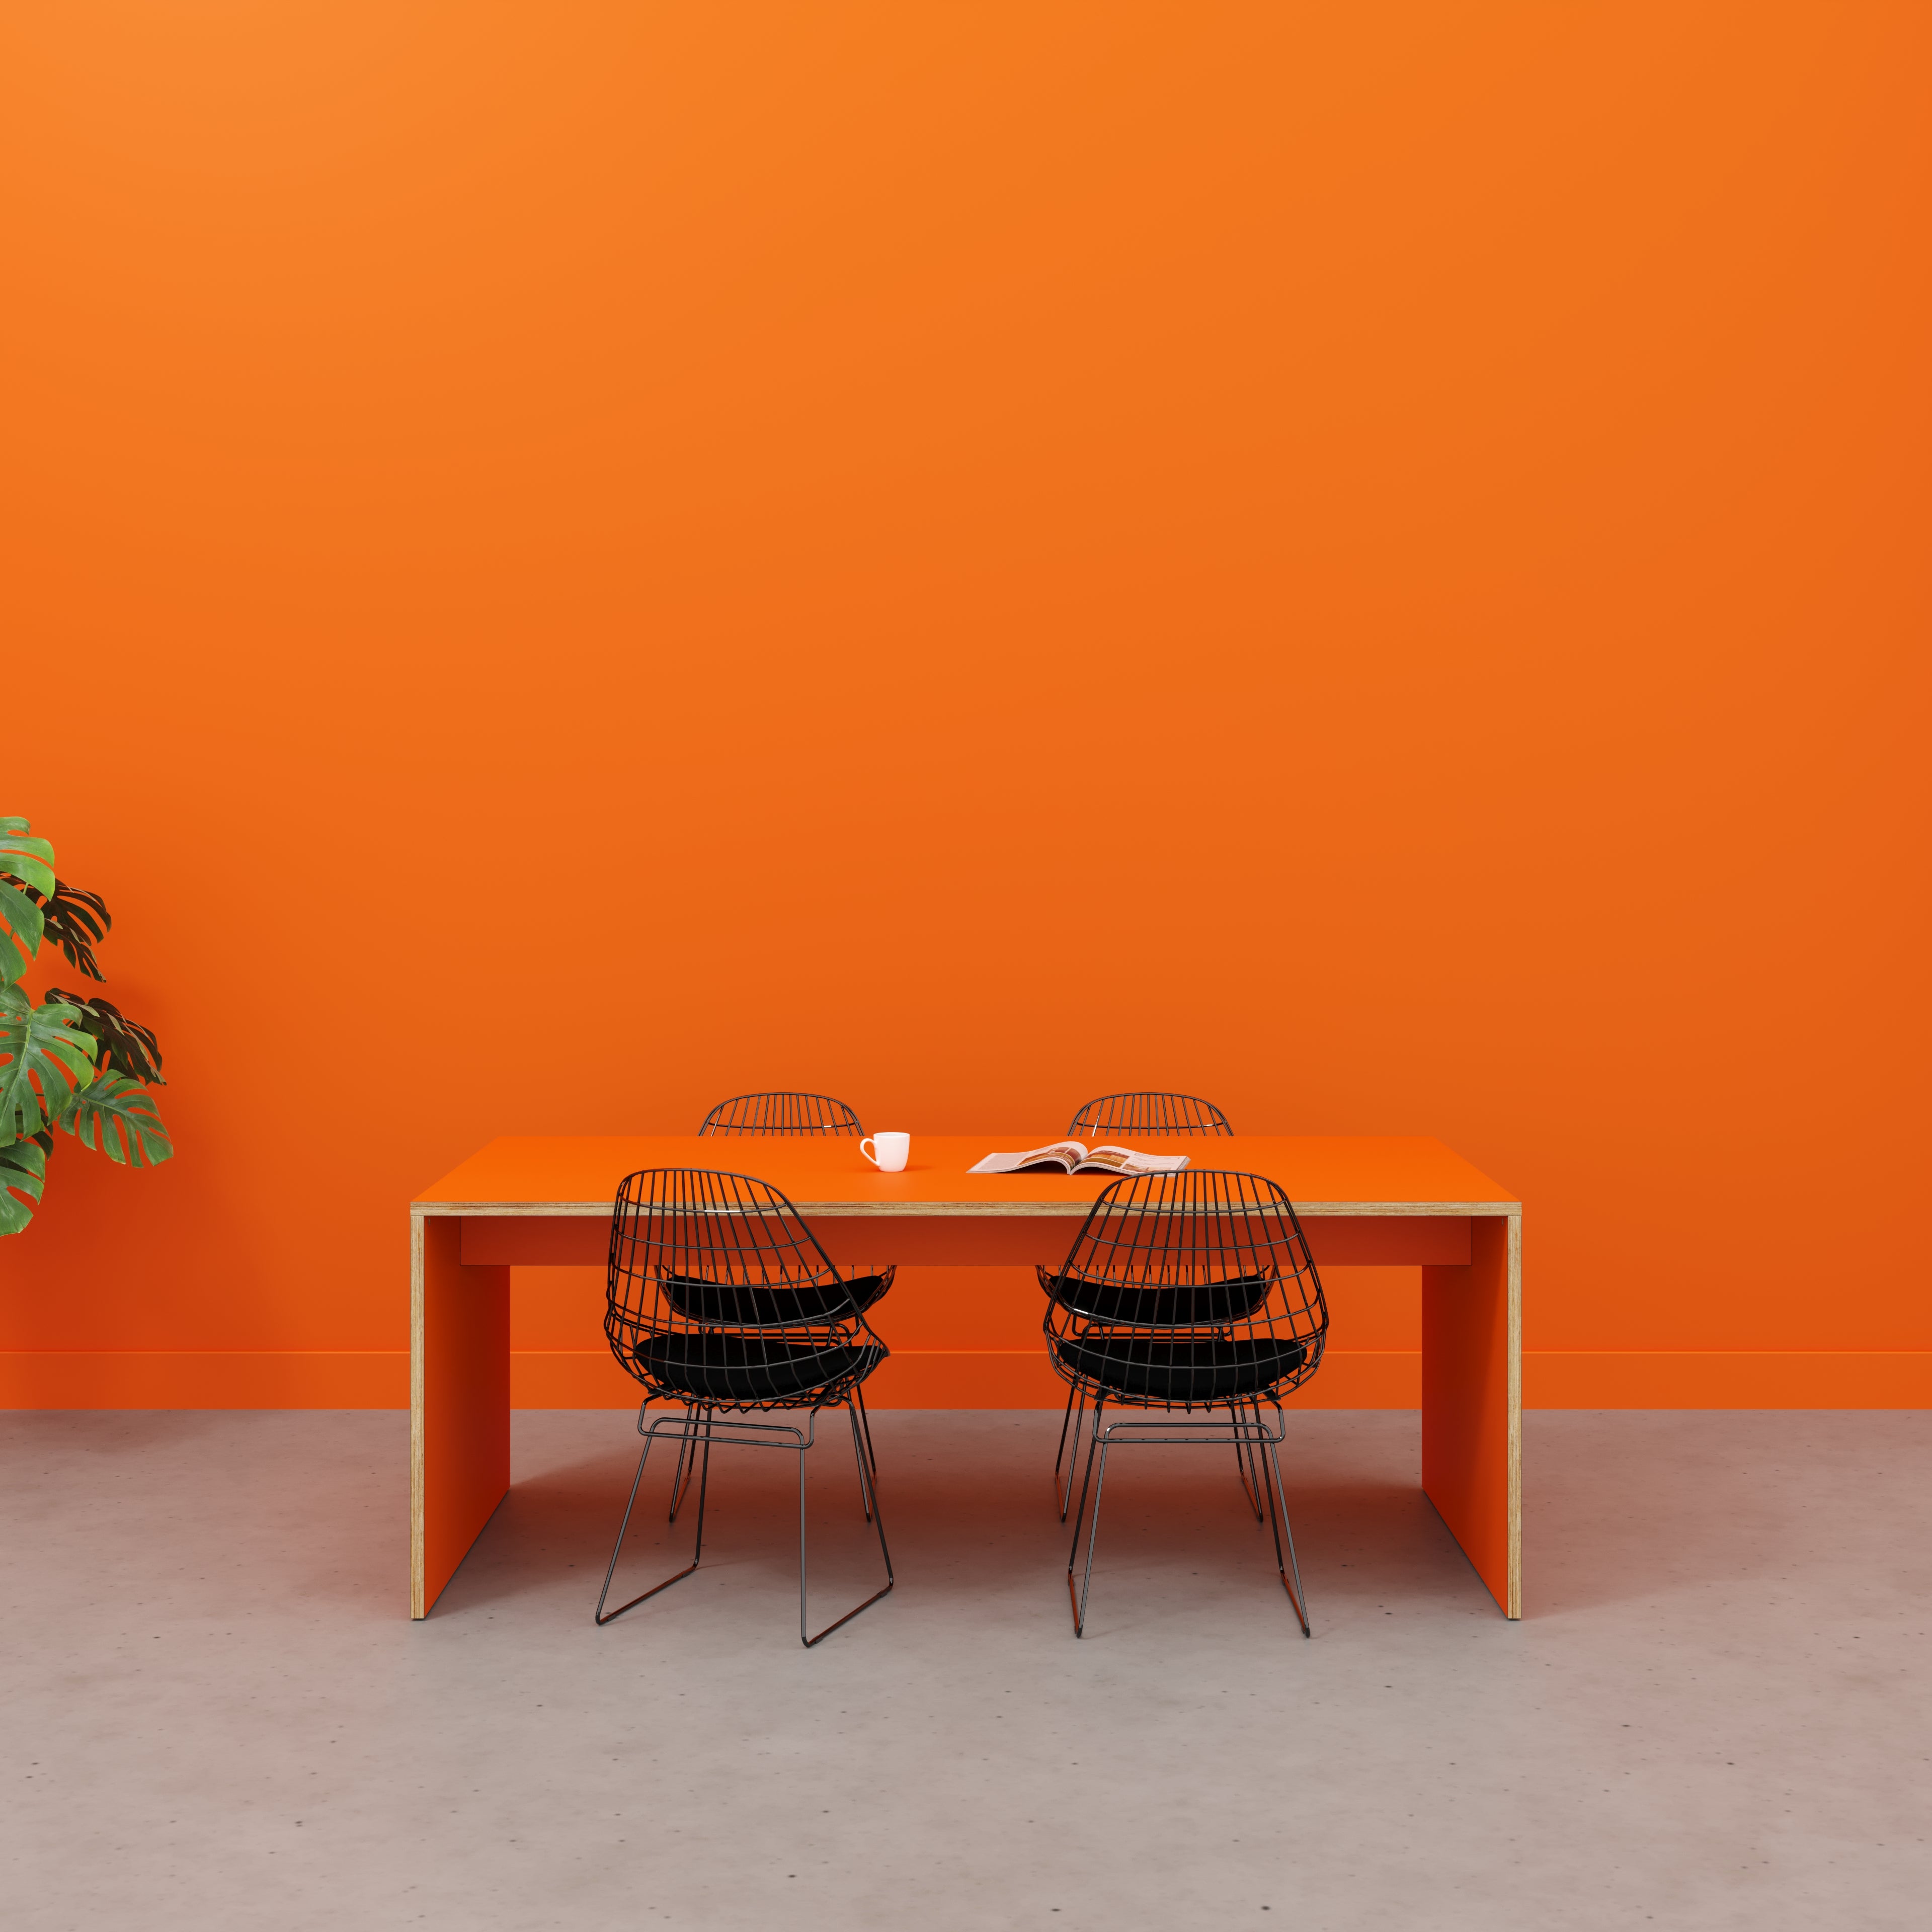 Table with Solid Sides - Formica Levante Orange - 2000(w) x 1000(d) x 750(h)